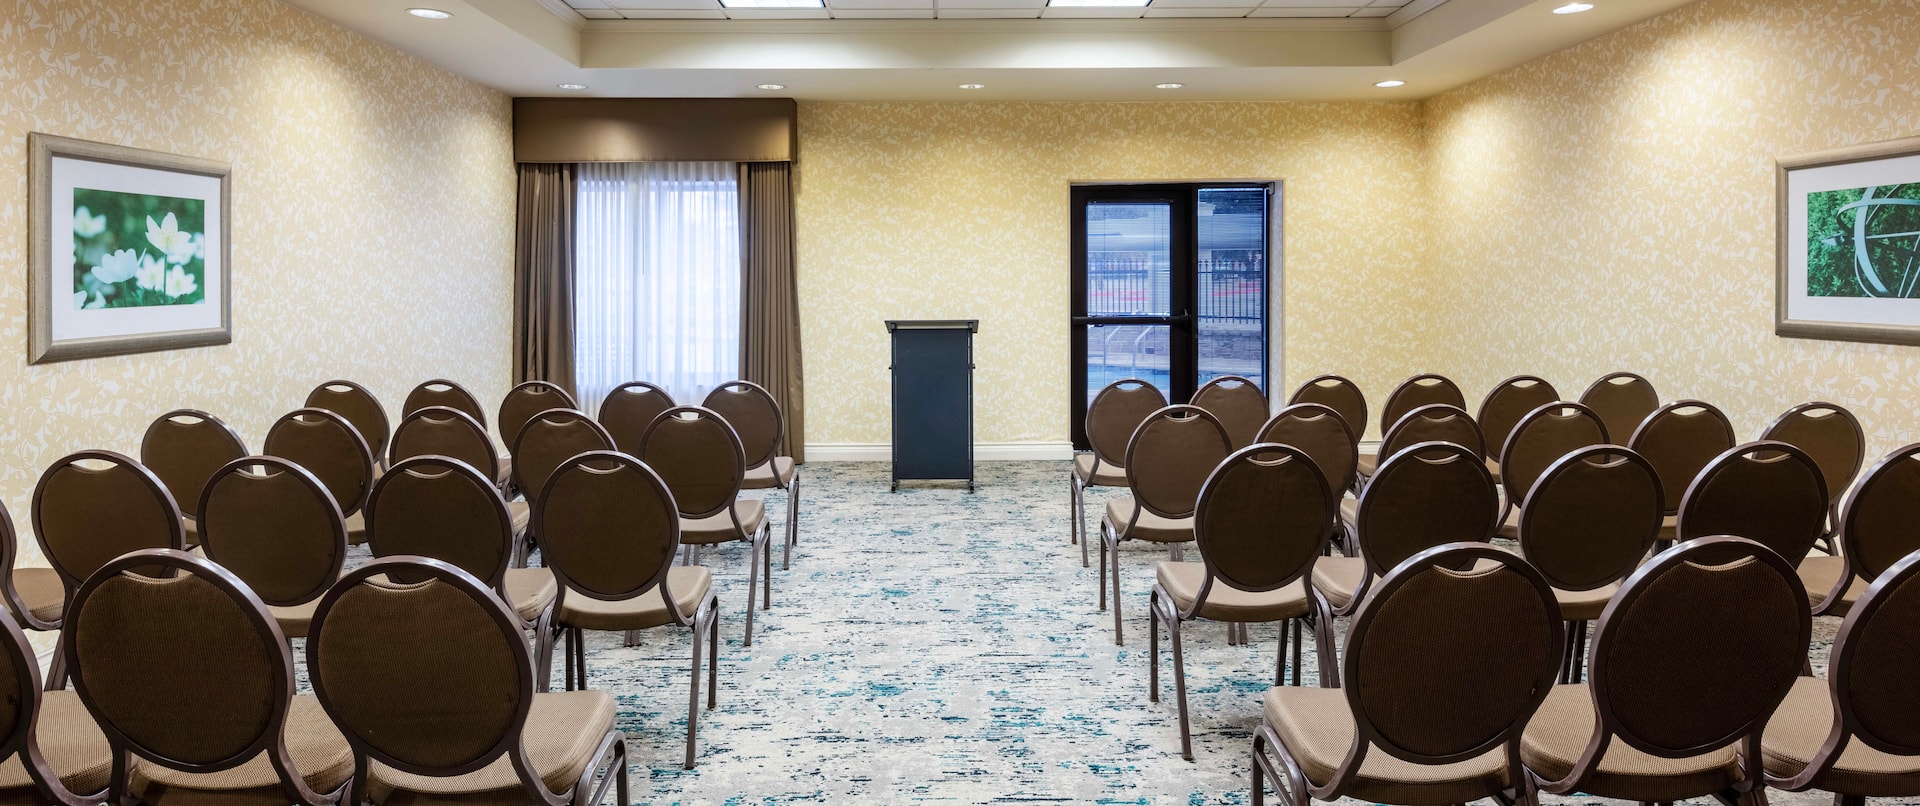 Meeting Room with Chairs and Podium